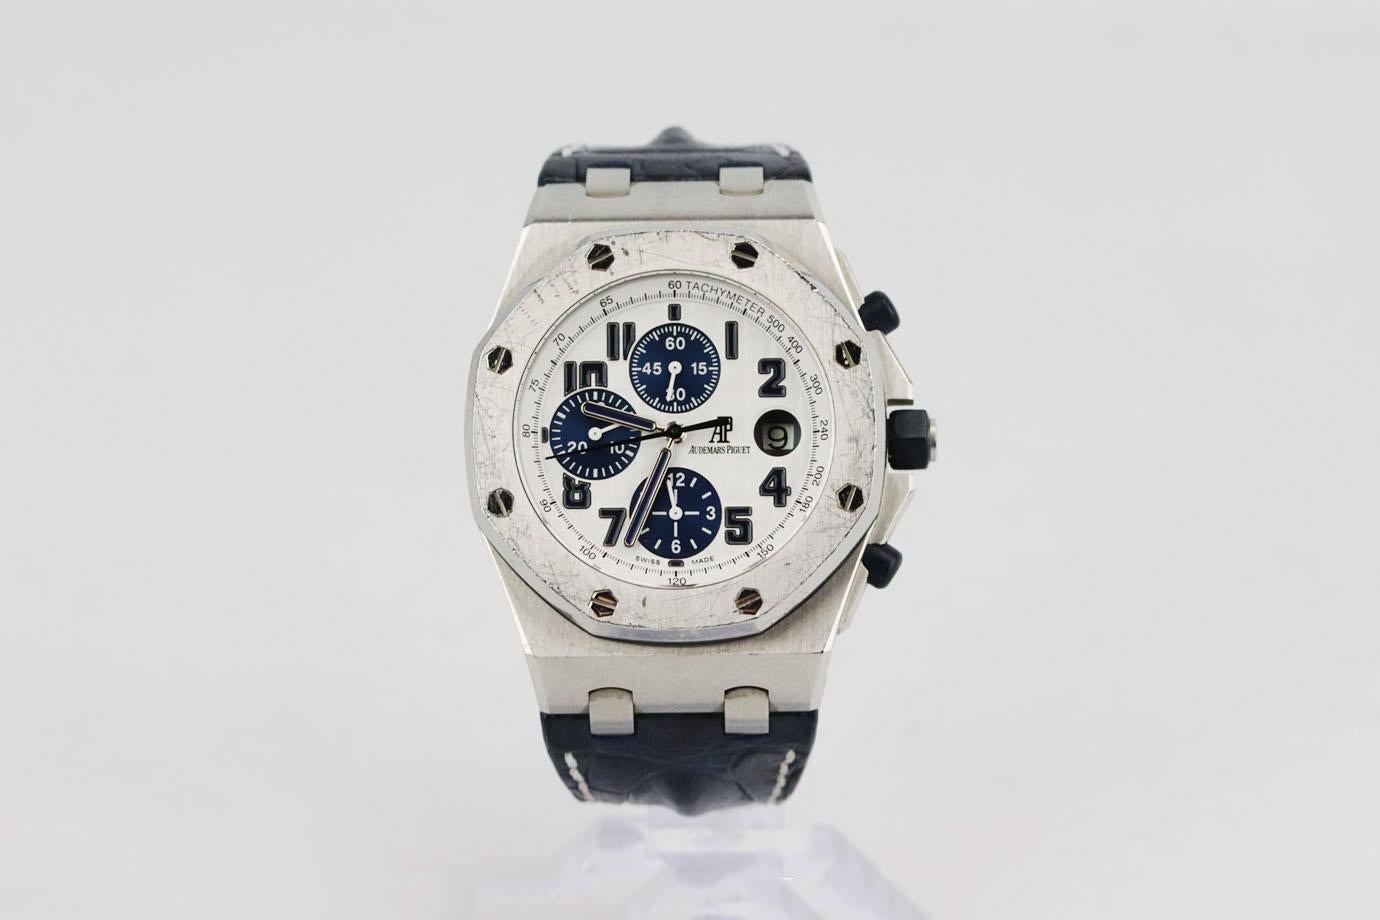 Audemar Piguet Royal Oak Offshore Chronograph 42mm navy modal wrist watch. This ’Royal Oak’ 42mm watch by Audemar Piguet has been crafted at the brand's Swiss atelier from steel with an intricate automatic movement and has a white dial and finished